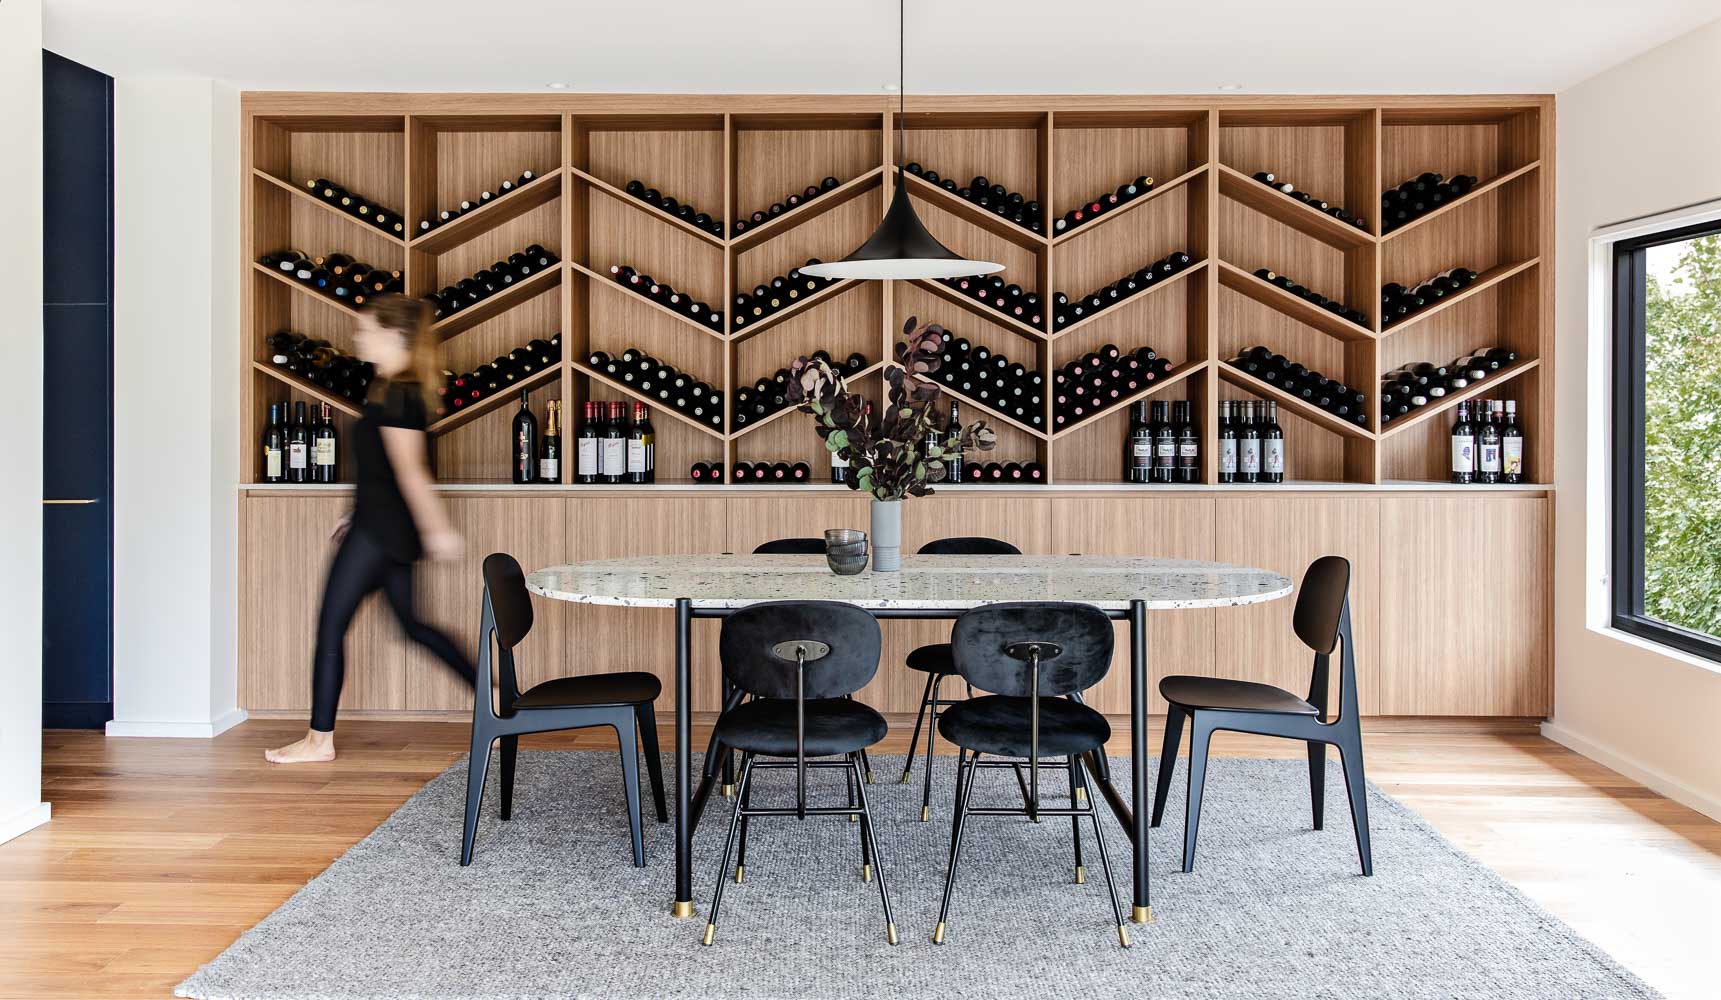 The wine storage wall, which is made from wood, includes lower cabinets, a countertop, and a shelving unit with a chevron design.